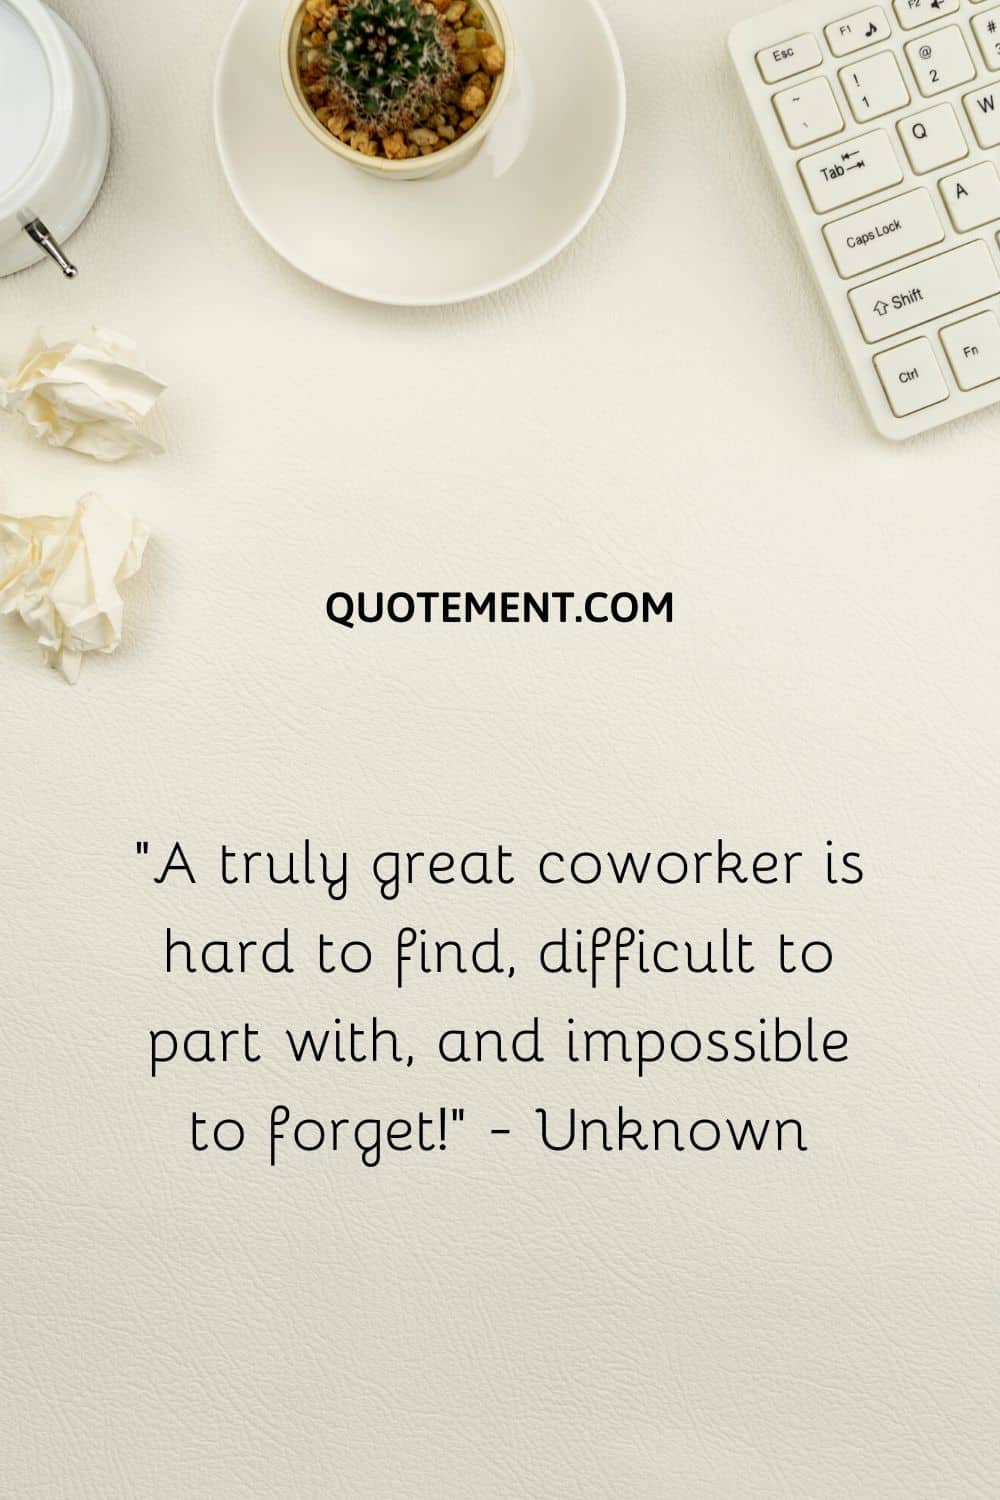 Top 80 Work Friends Quotes For Your Wonderful Coworkers